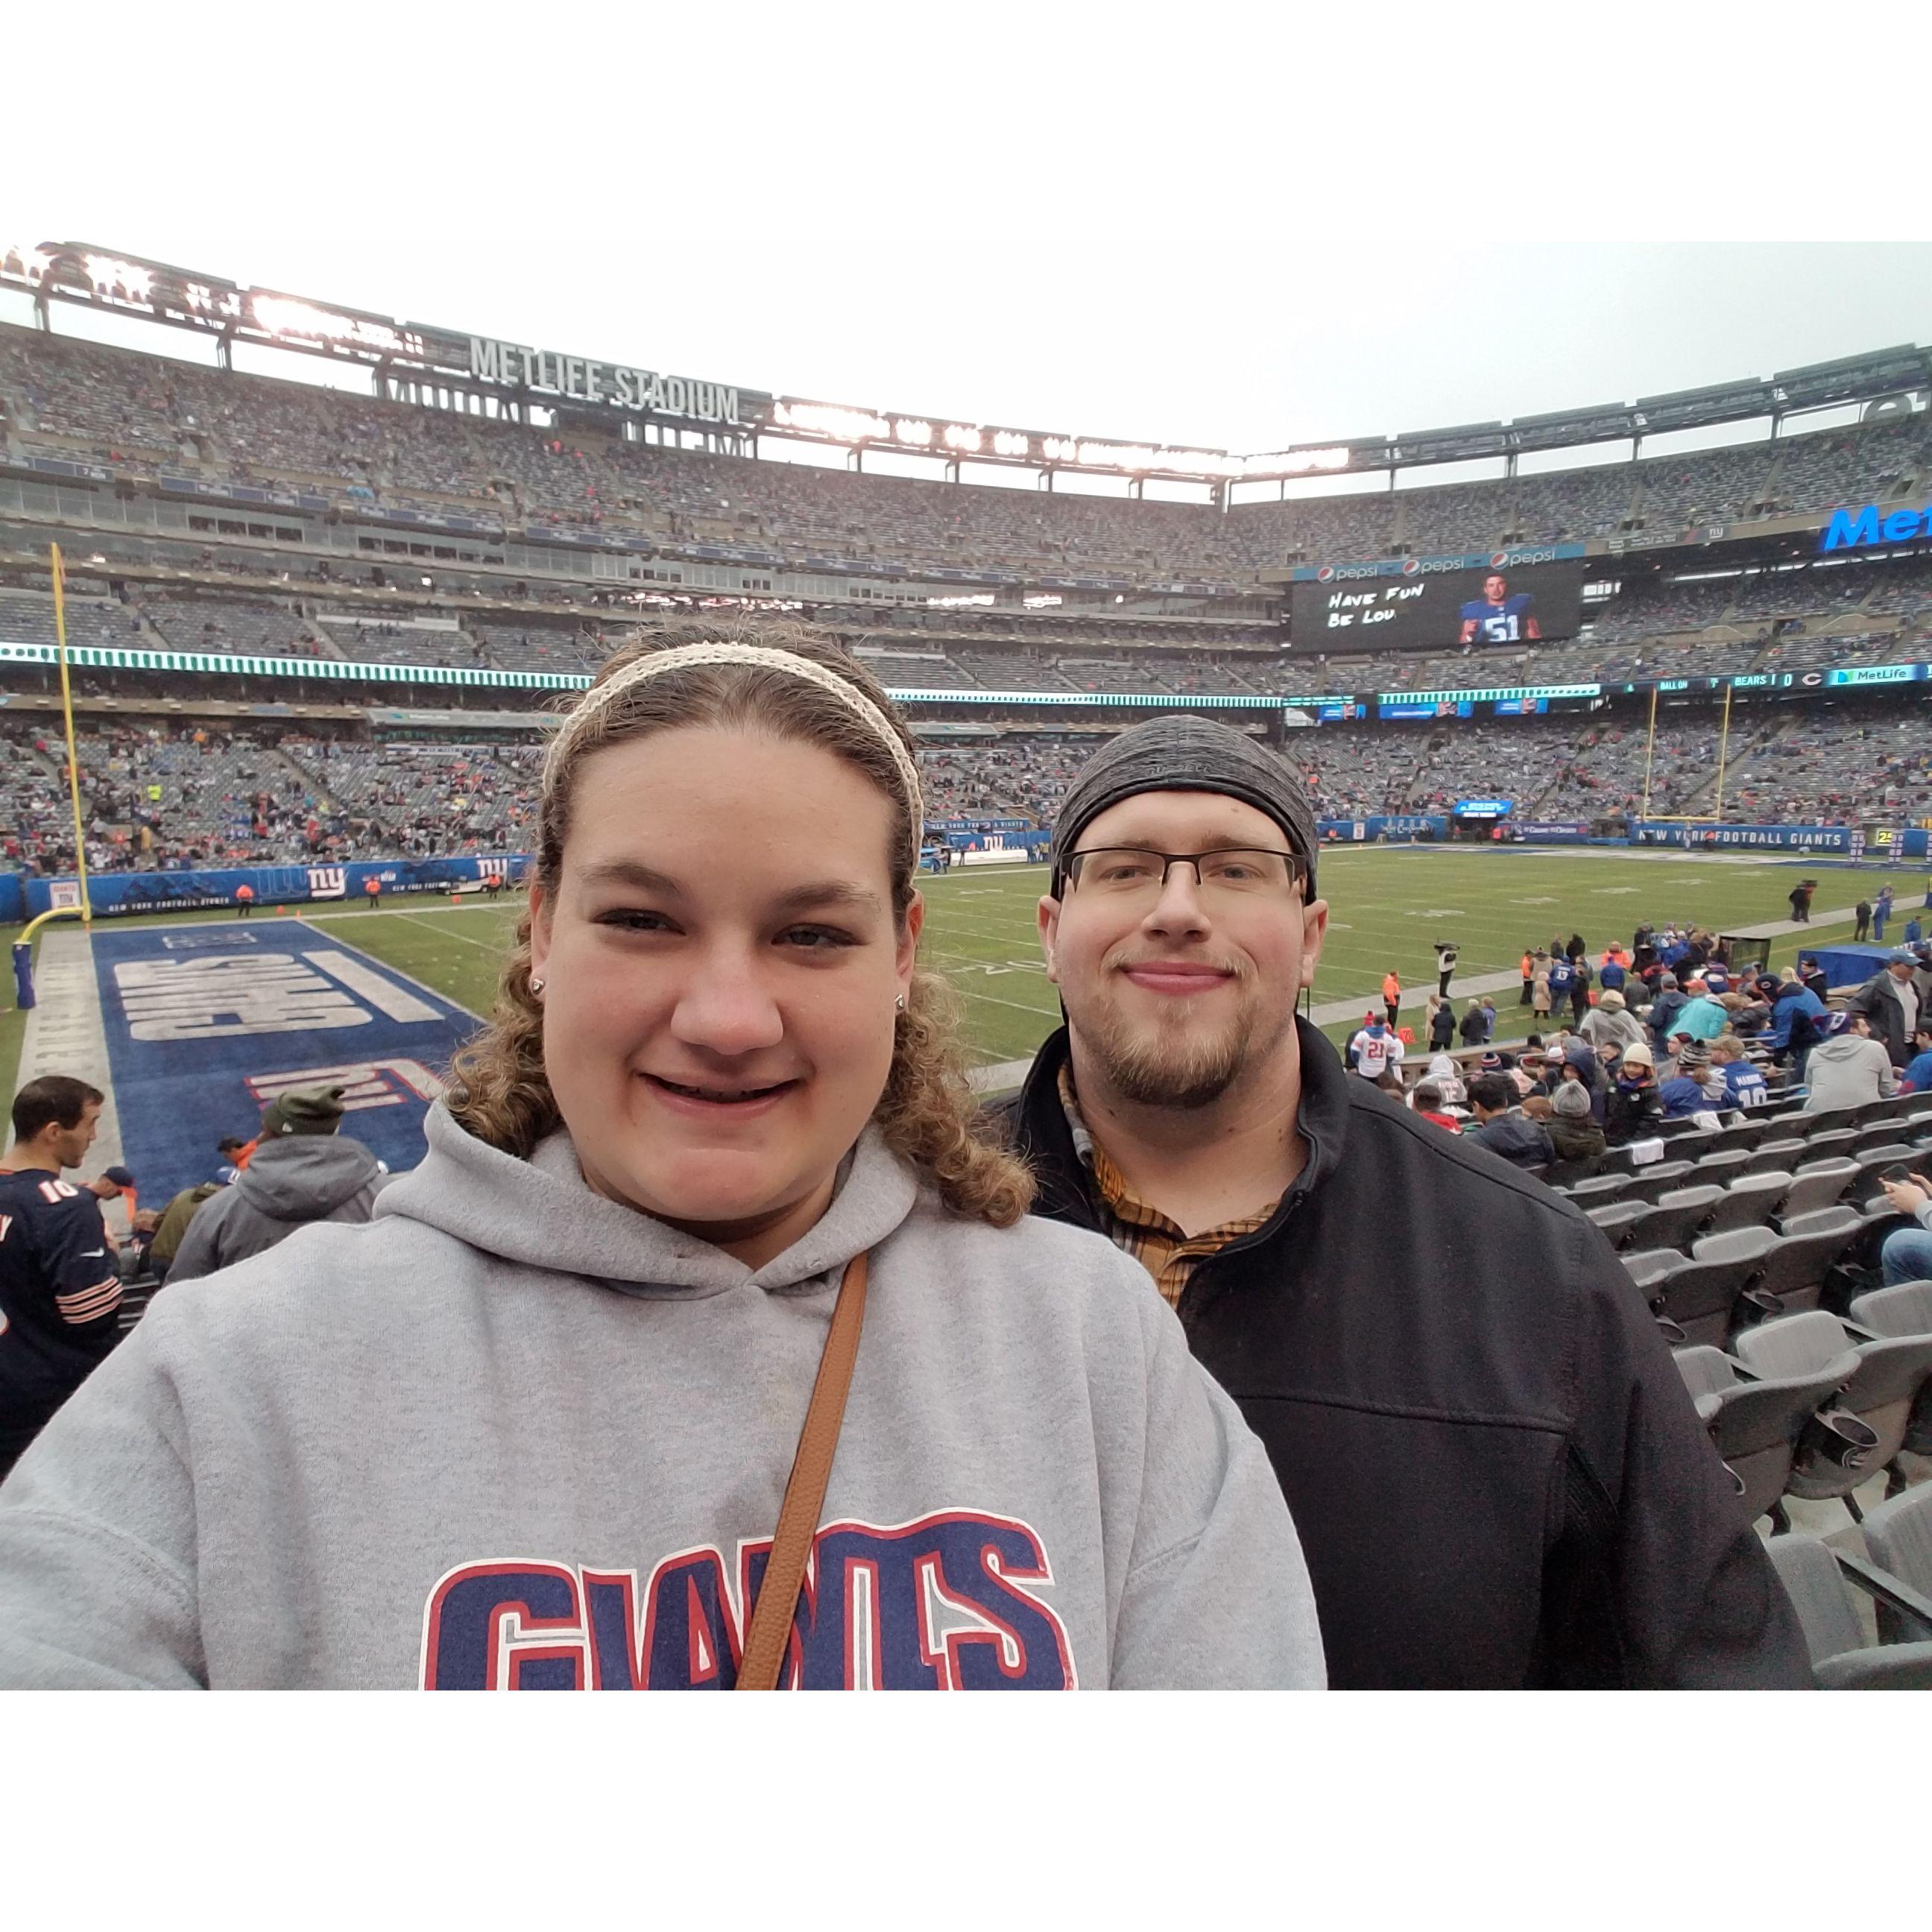 Our first road trip - to a NY Giants game in 2018